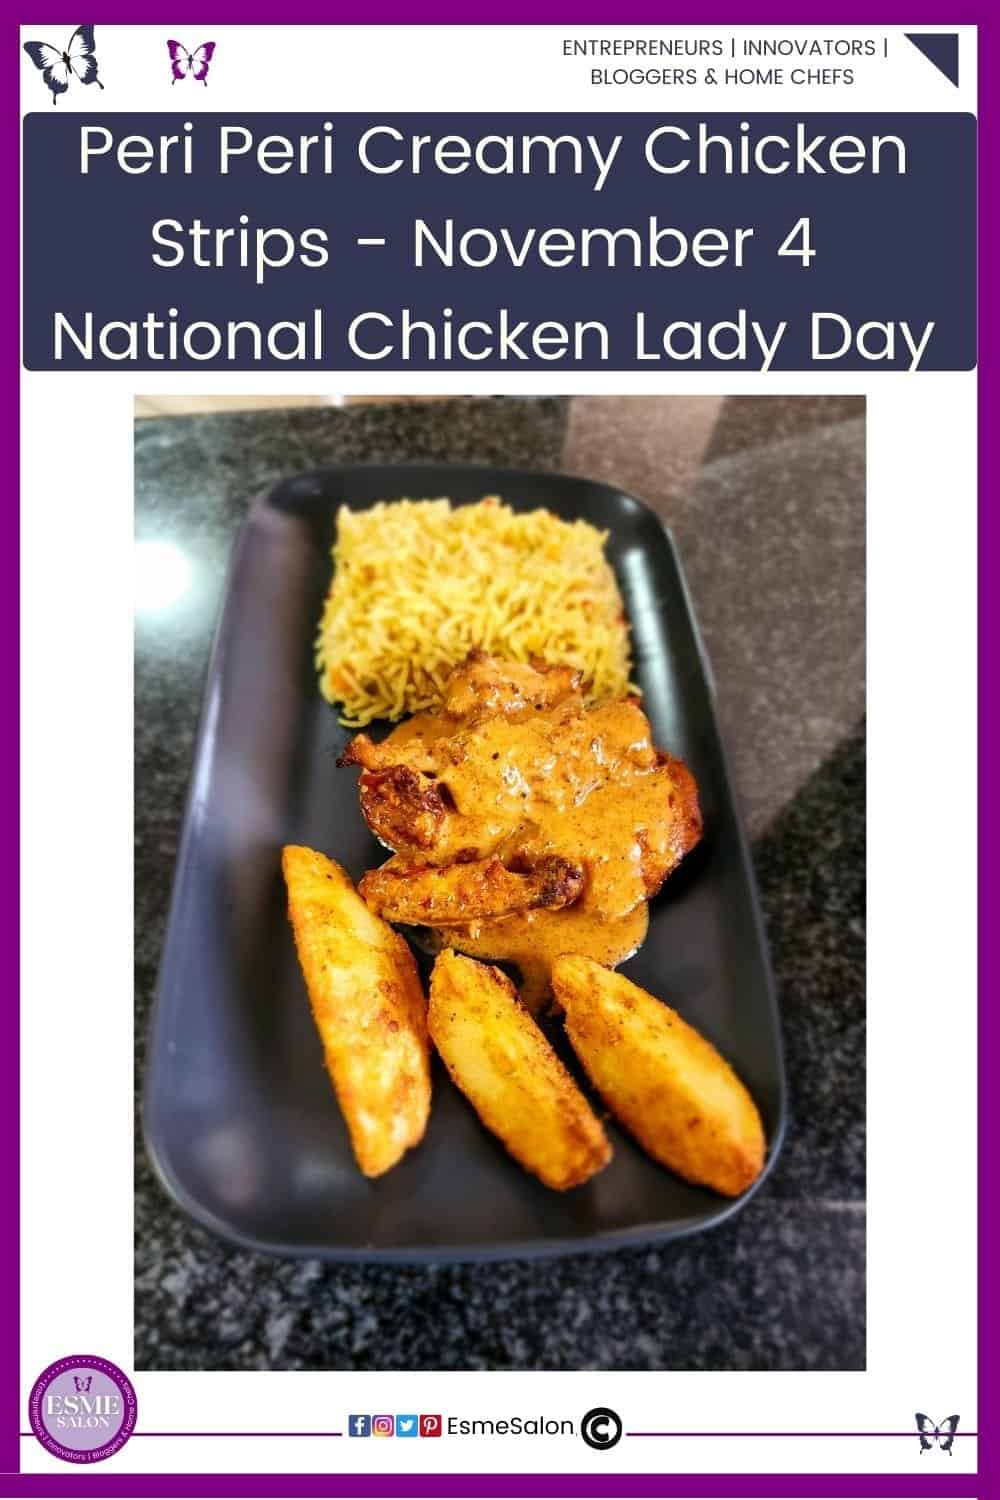 an image of plate filled with Peri Peri Creamy Chicken Strips served with yellow rice and crispy potato wedges